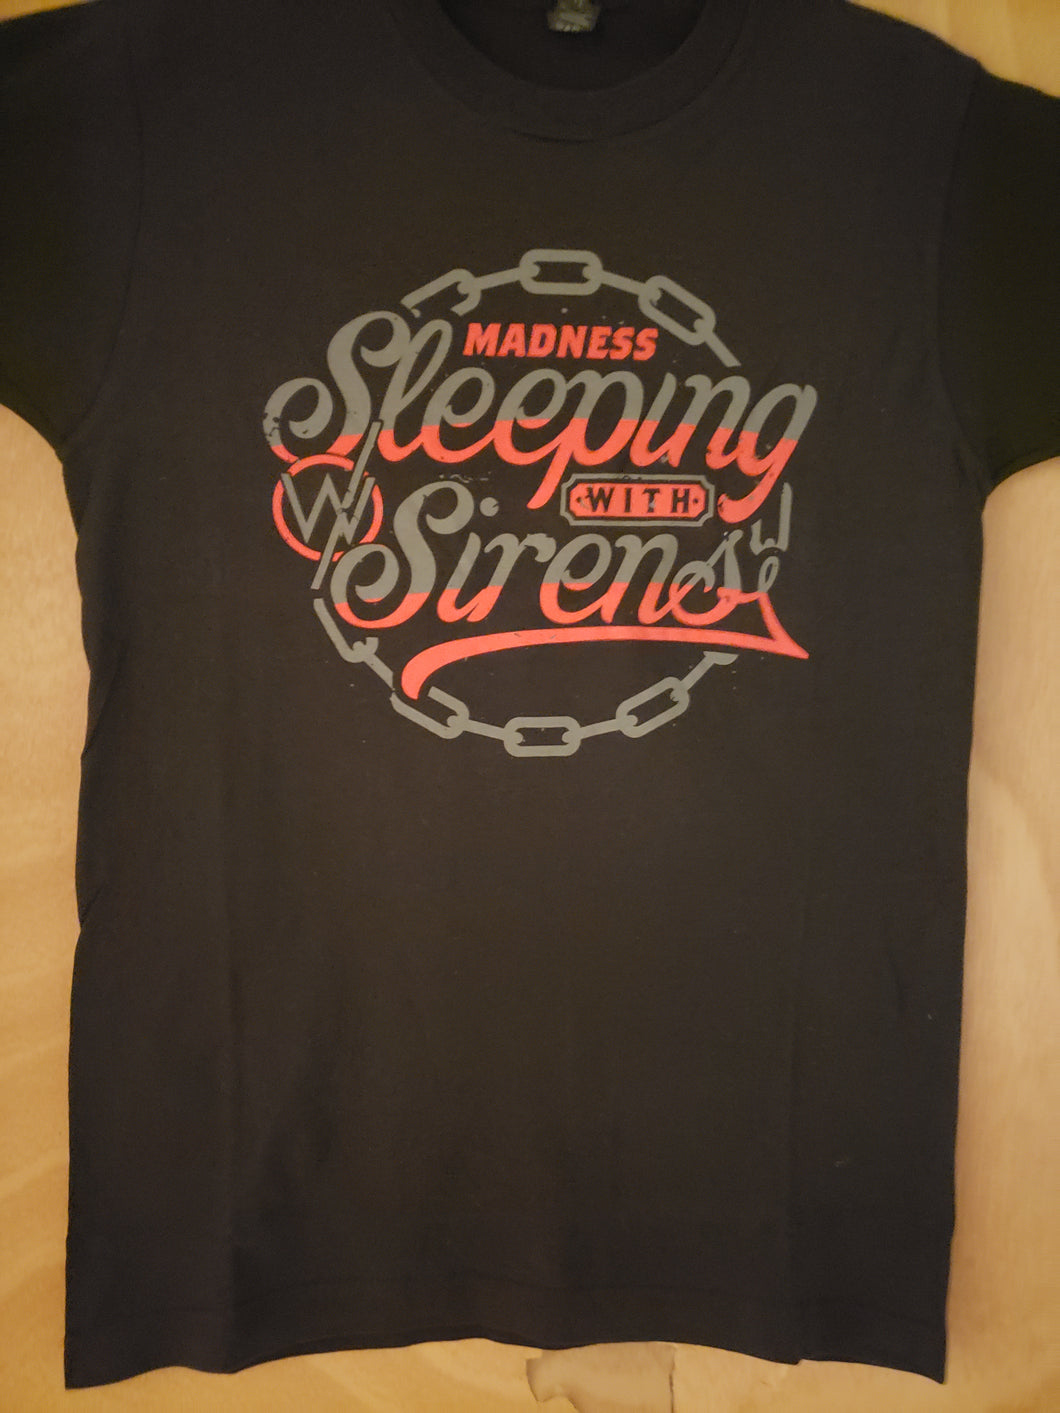 SLEEPING WITH SIRENS T-SHIRT BRAND NEW SMALL